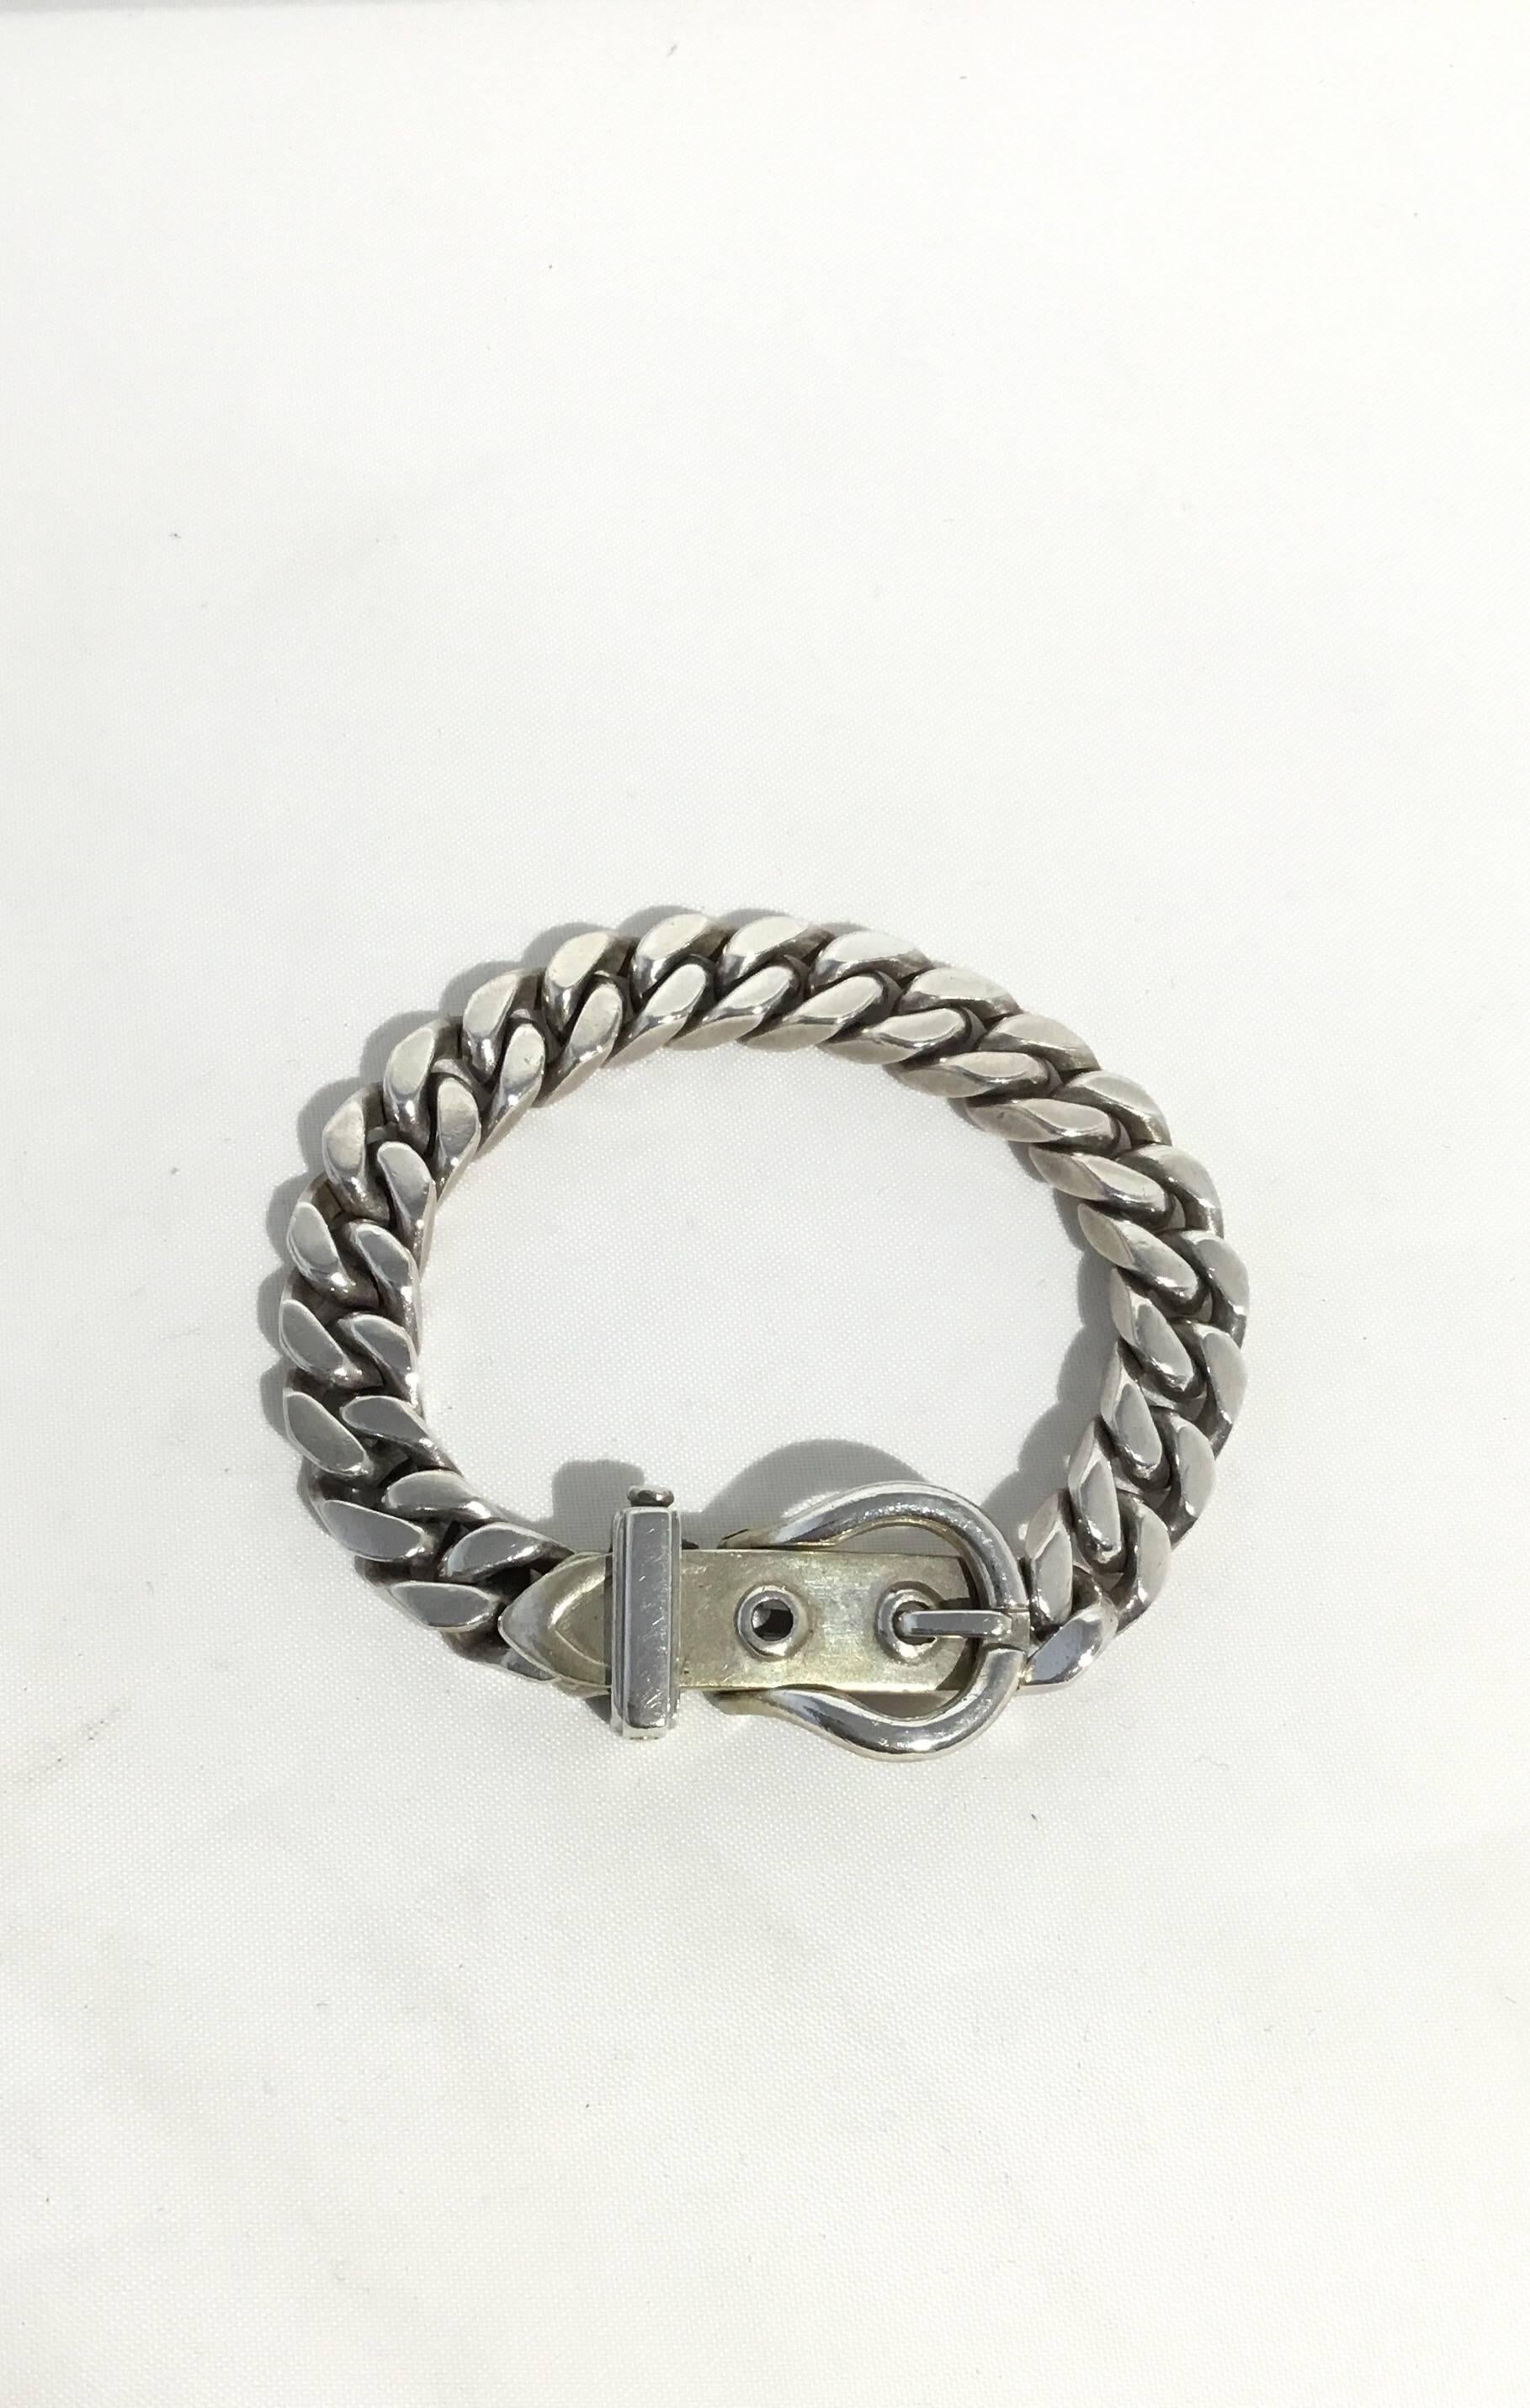 Vintage Hermes bracelet features in Sterling Silver with a buckle design. Bracelet measures approximately 8 inches long. (7” from buckle closure to smallest size, 7.5” from buckle to largest size).  Normal wears.